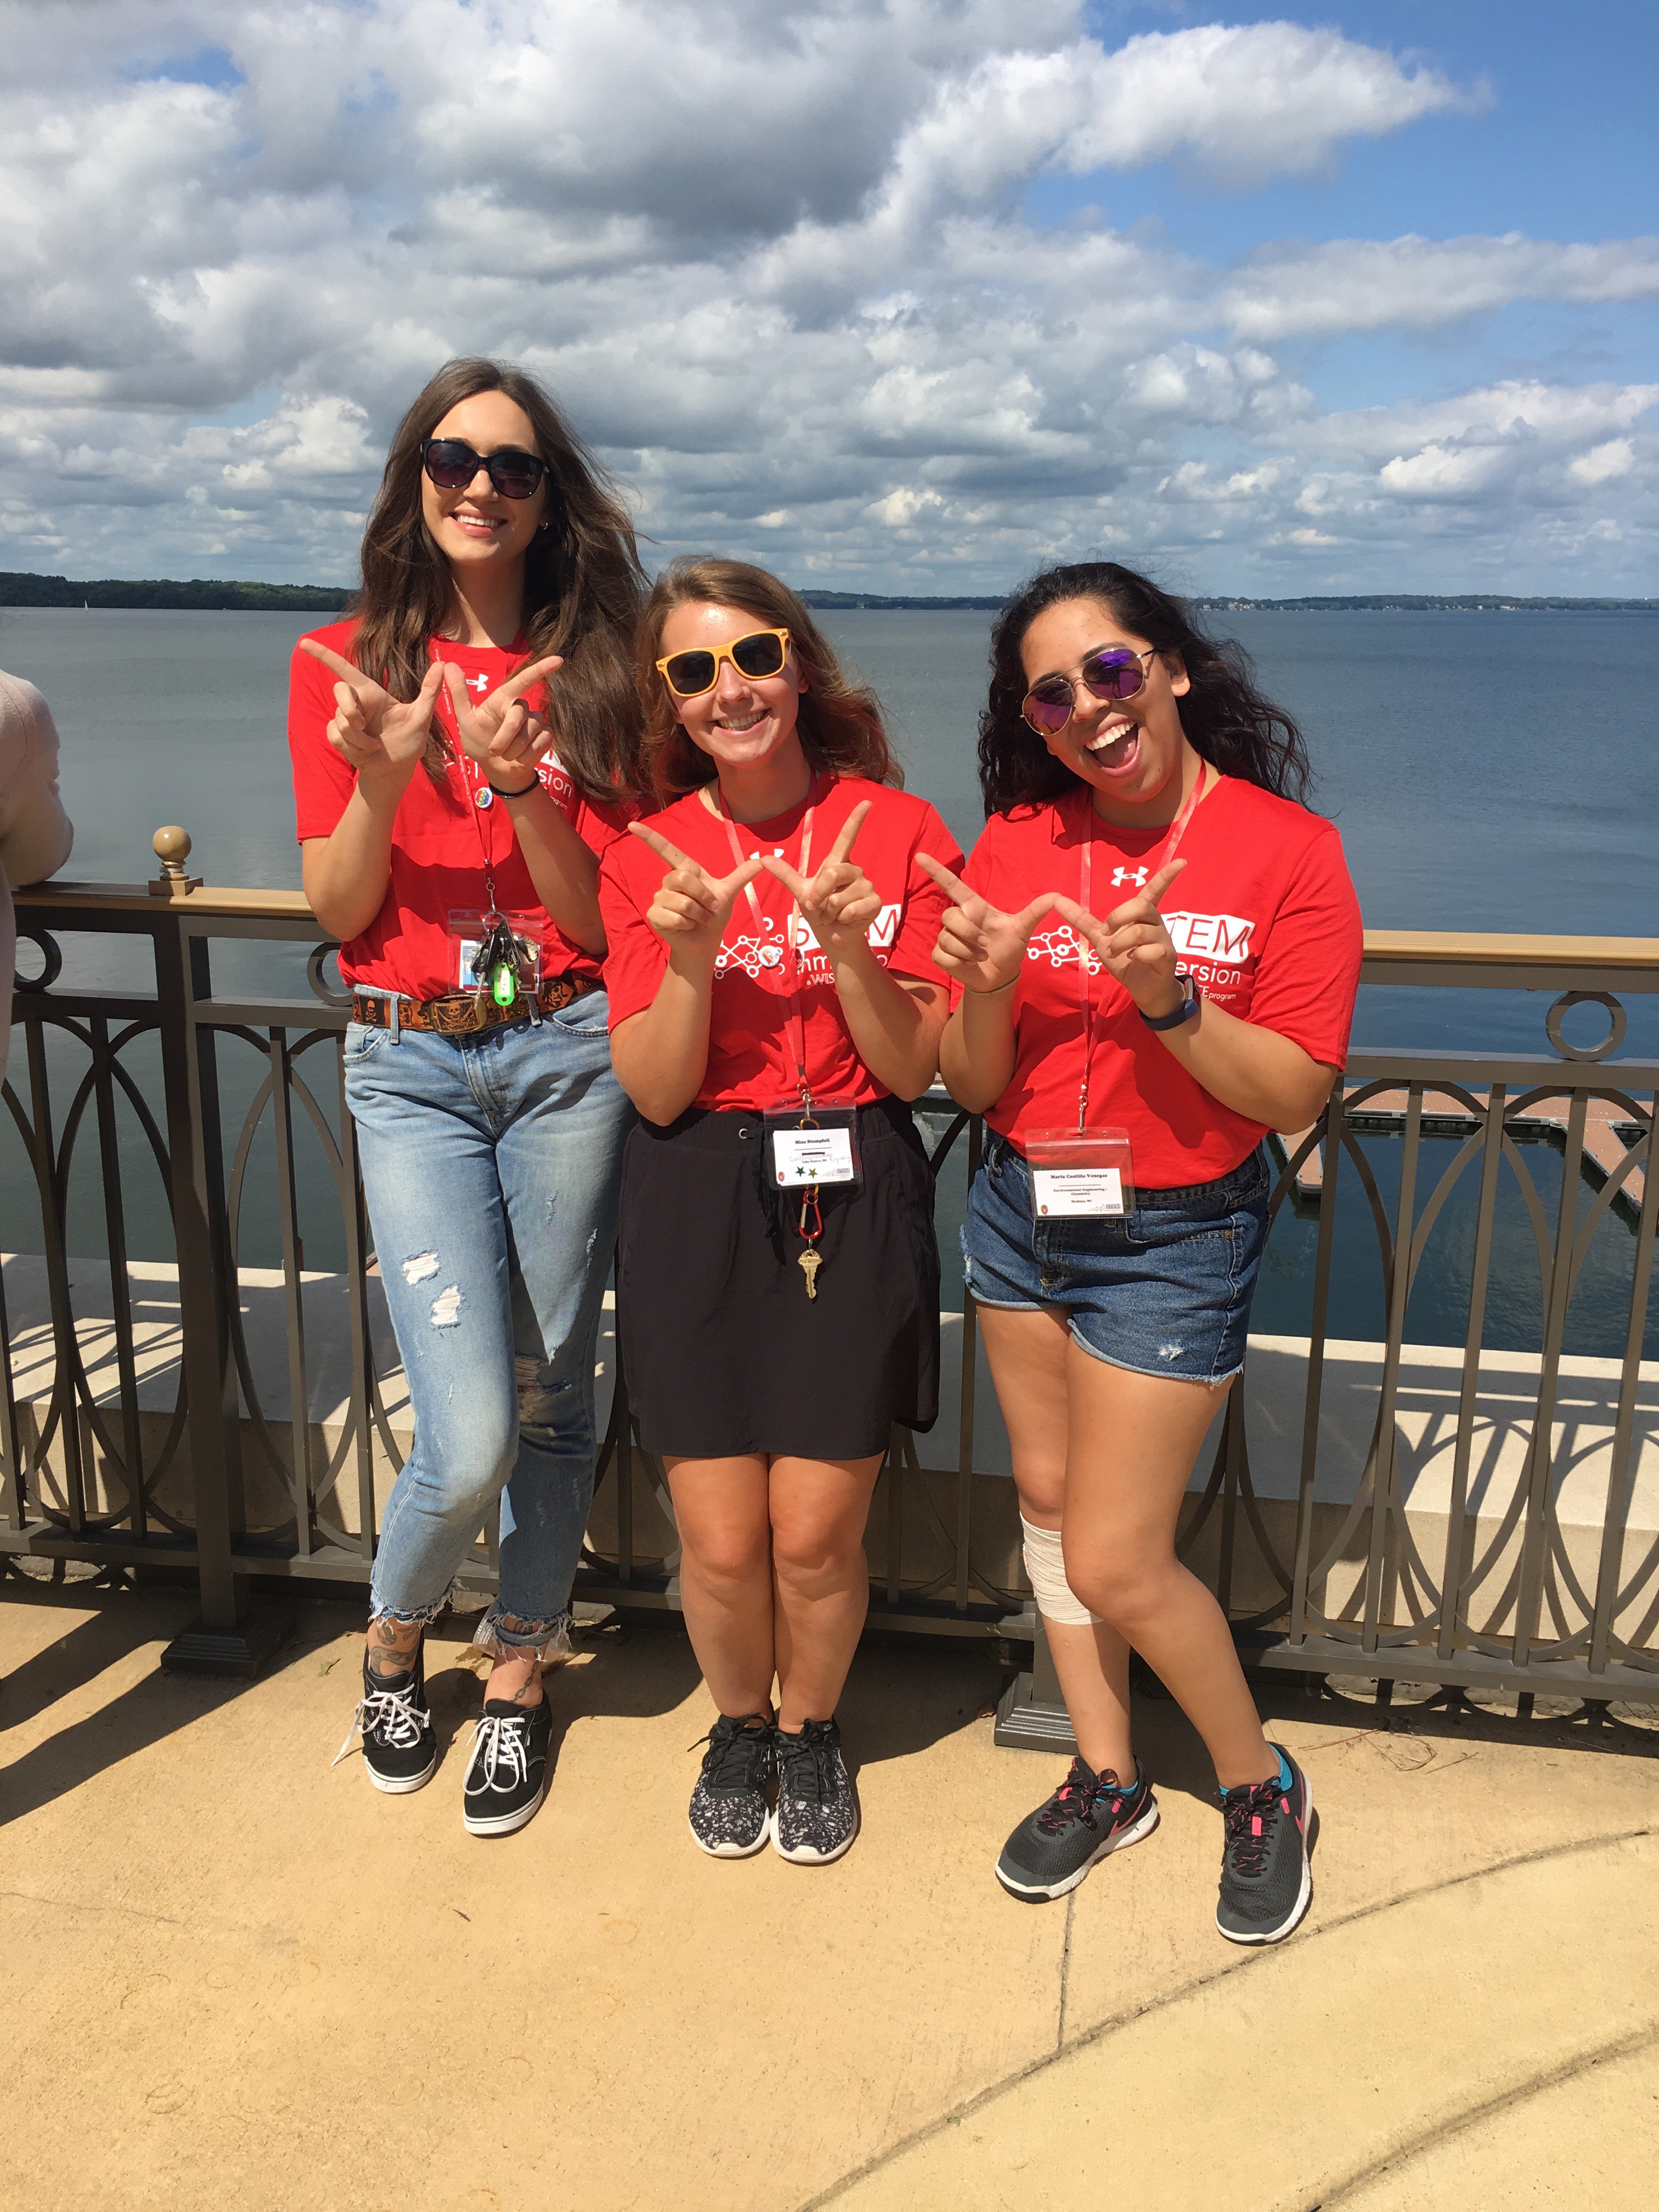 A photo of three college students holding their hands in the shape of a "W" for Wisconsin.